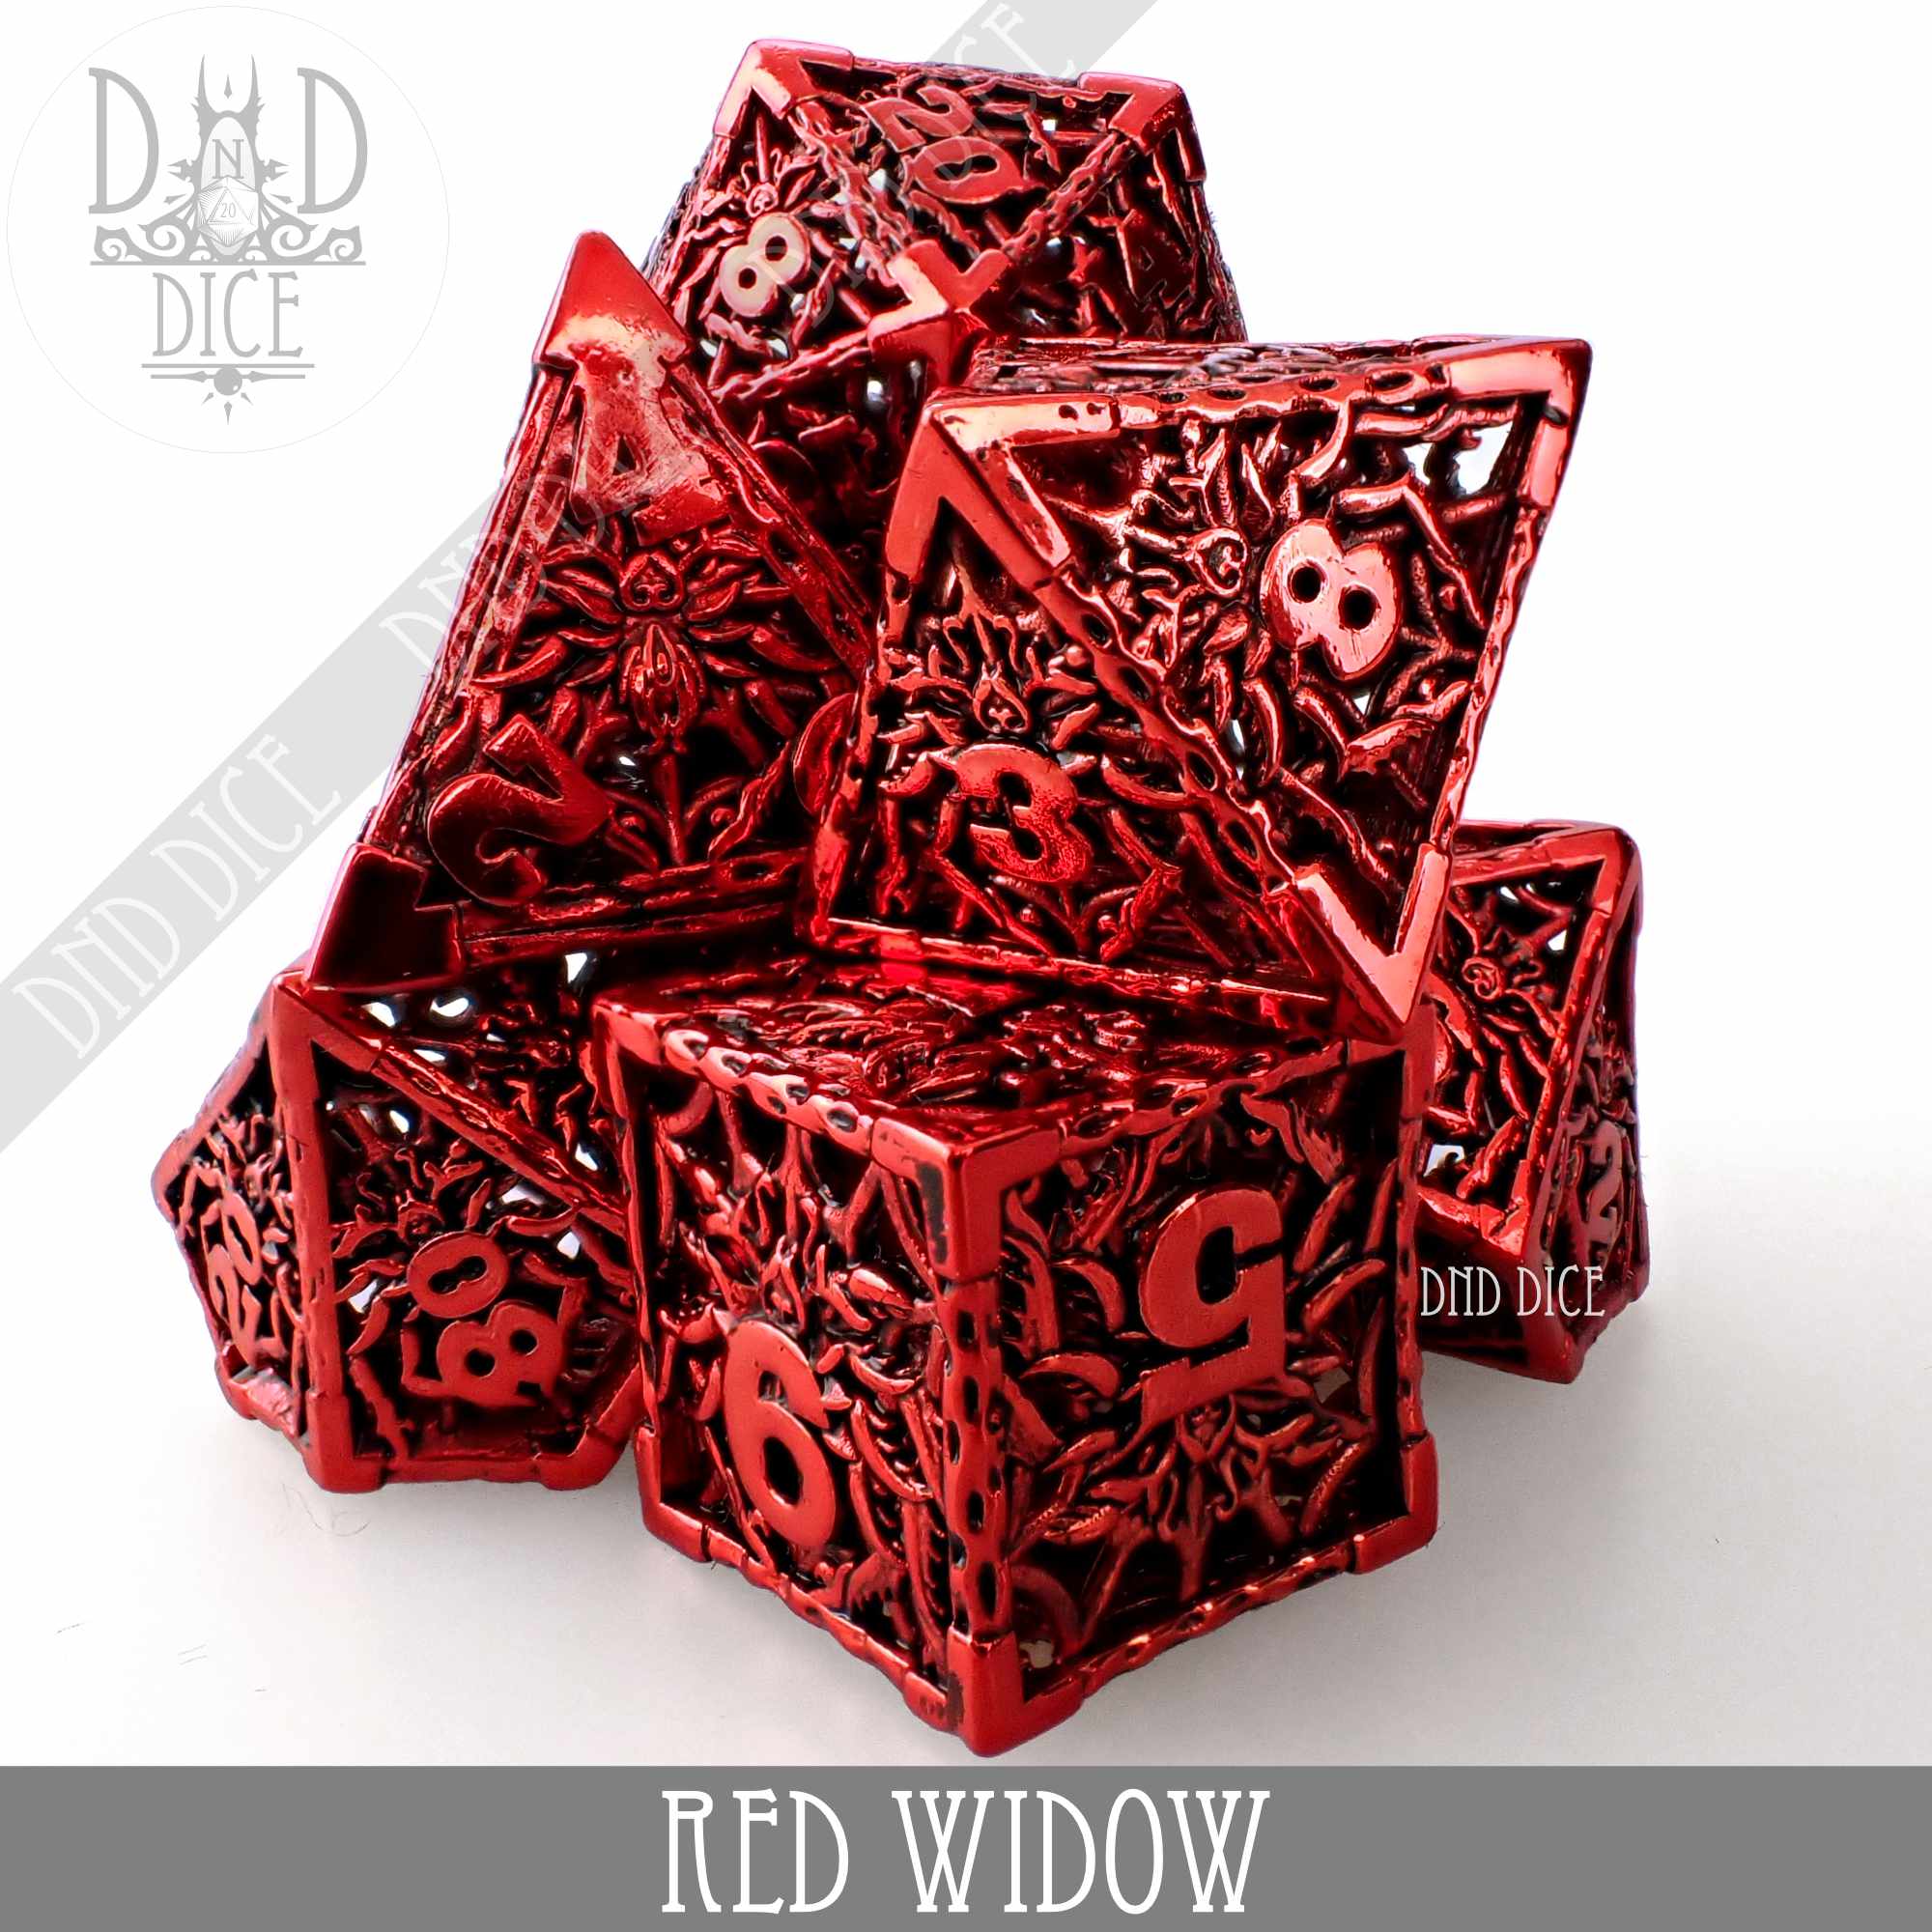 Red Widow Spider - Metal (Gift Box)